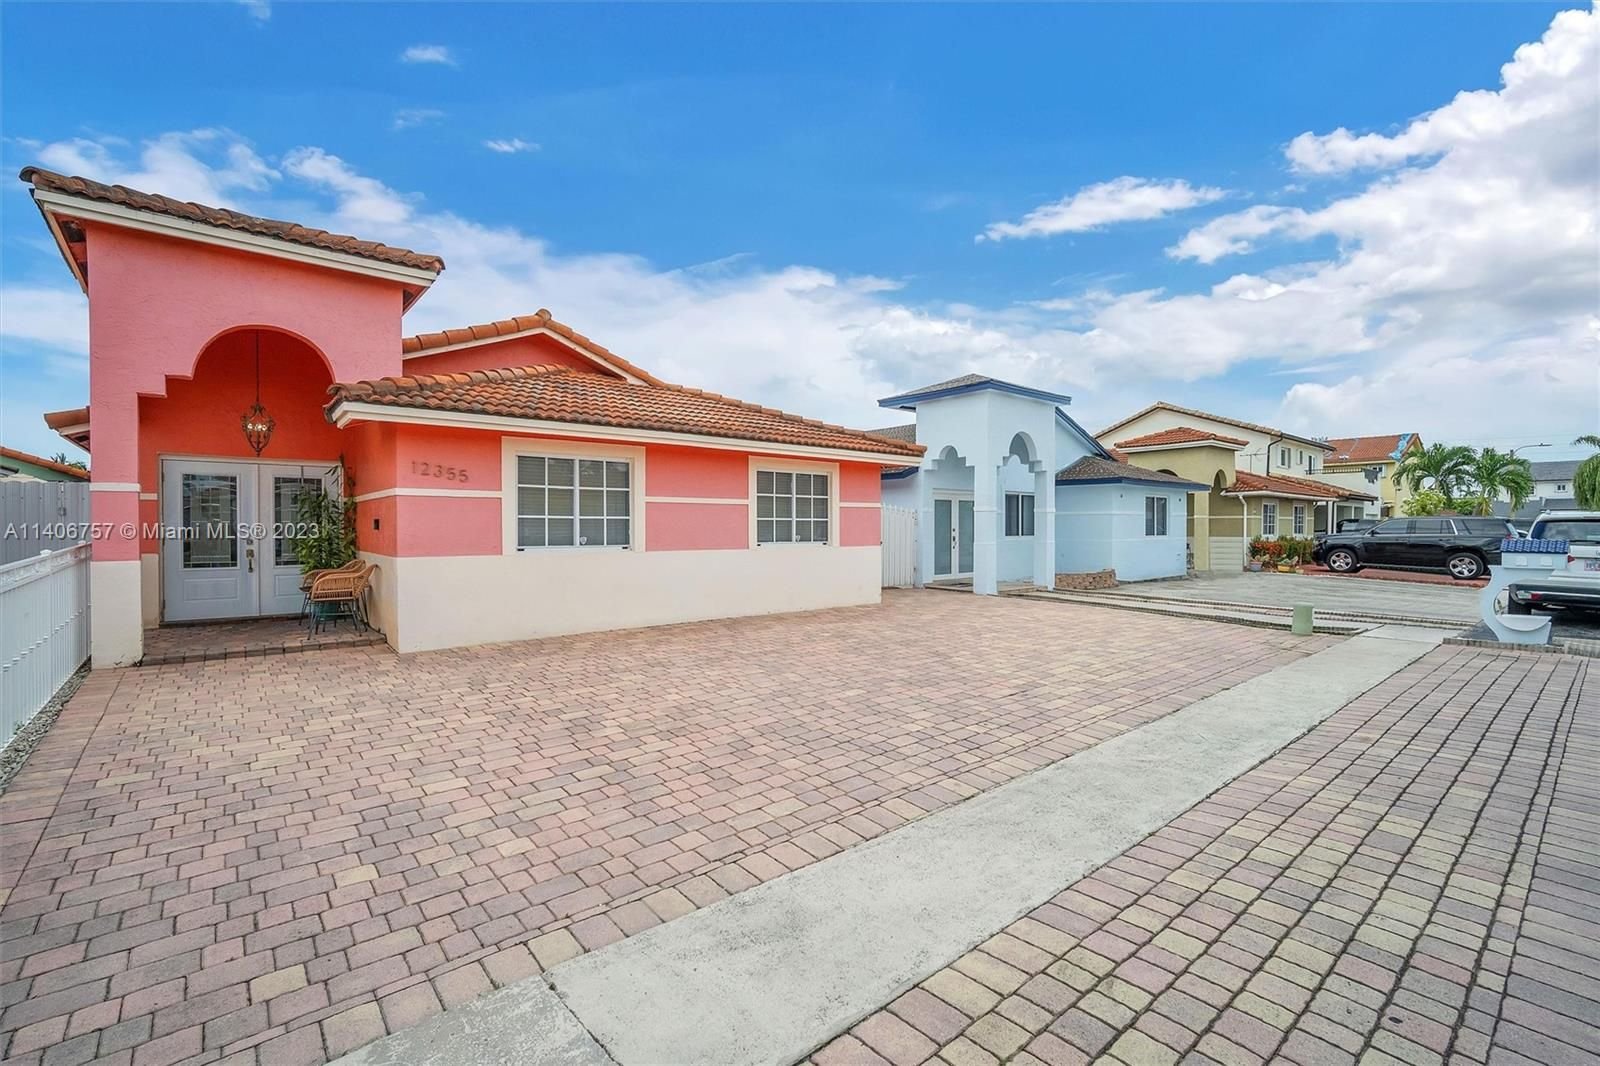 Real estate property located at 12355 98th Ave, Miami-Dade County, Hialeah Gardens, FL